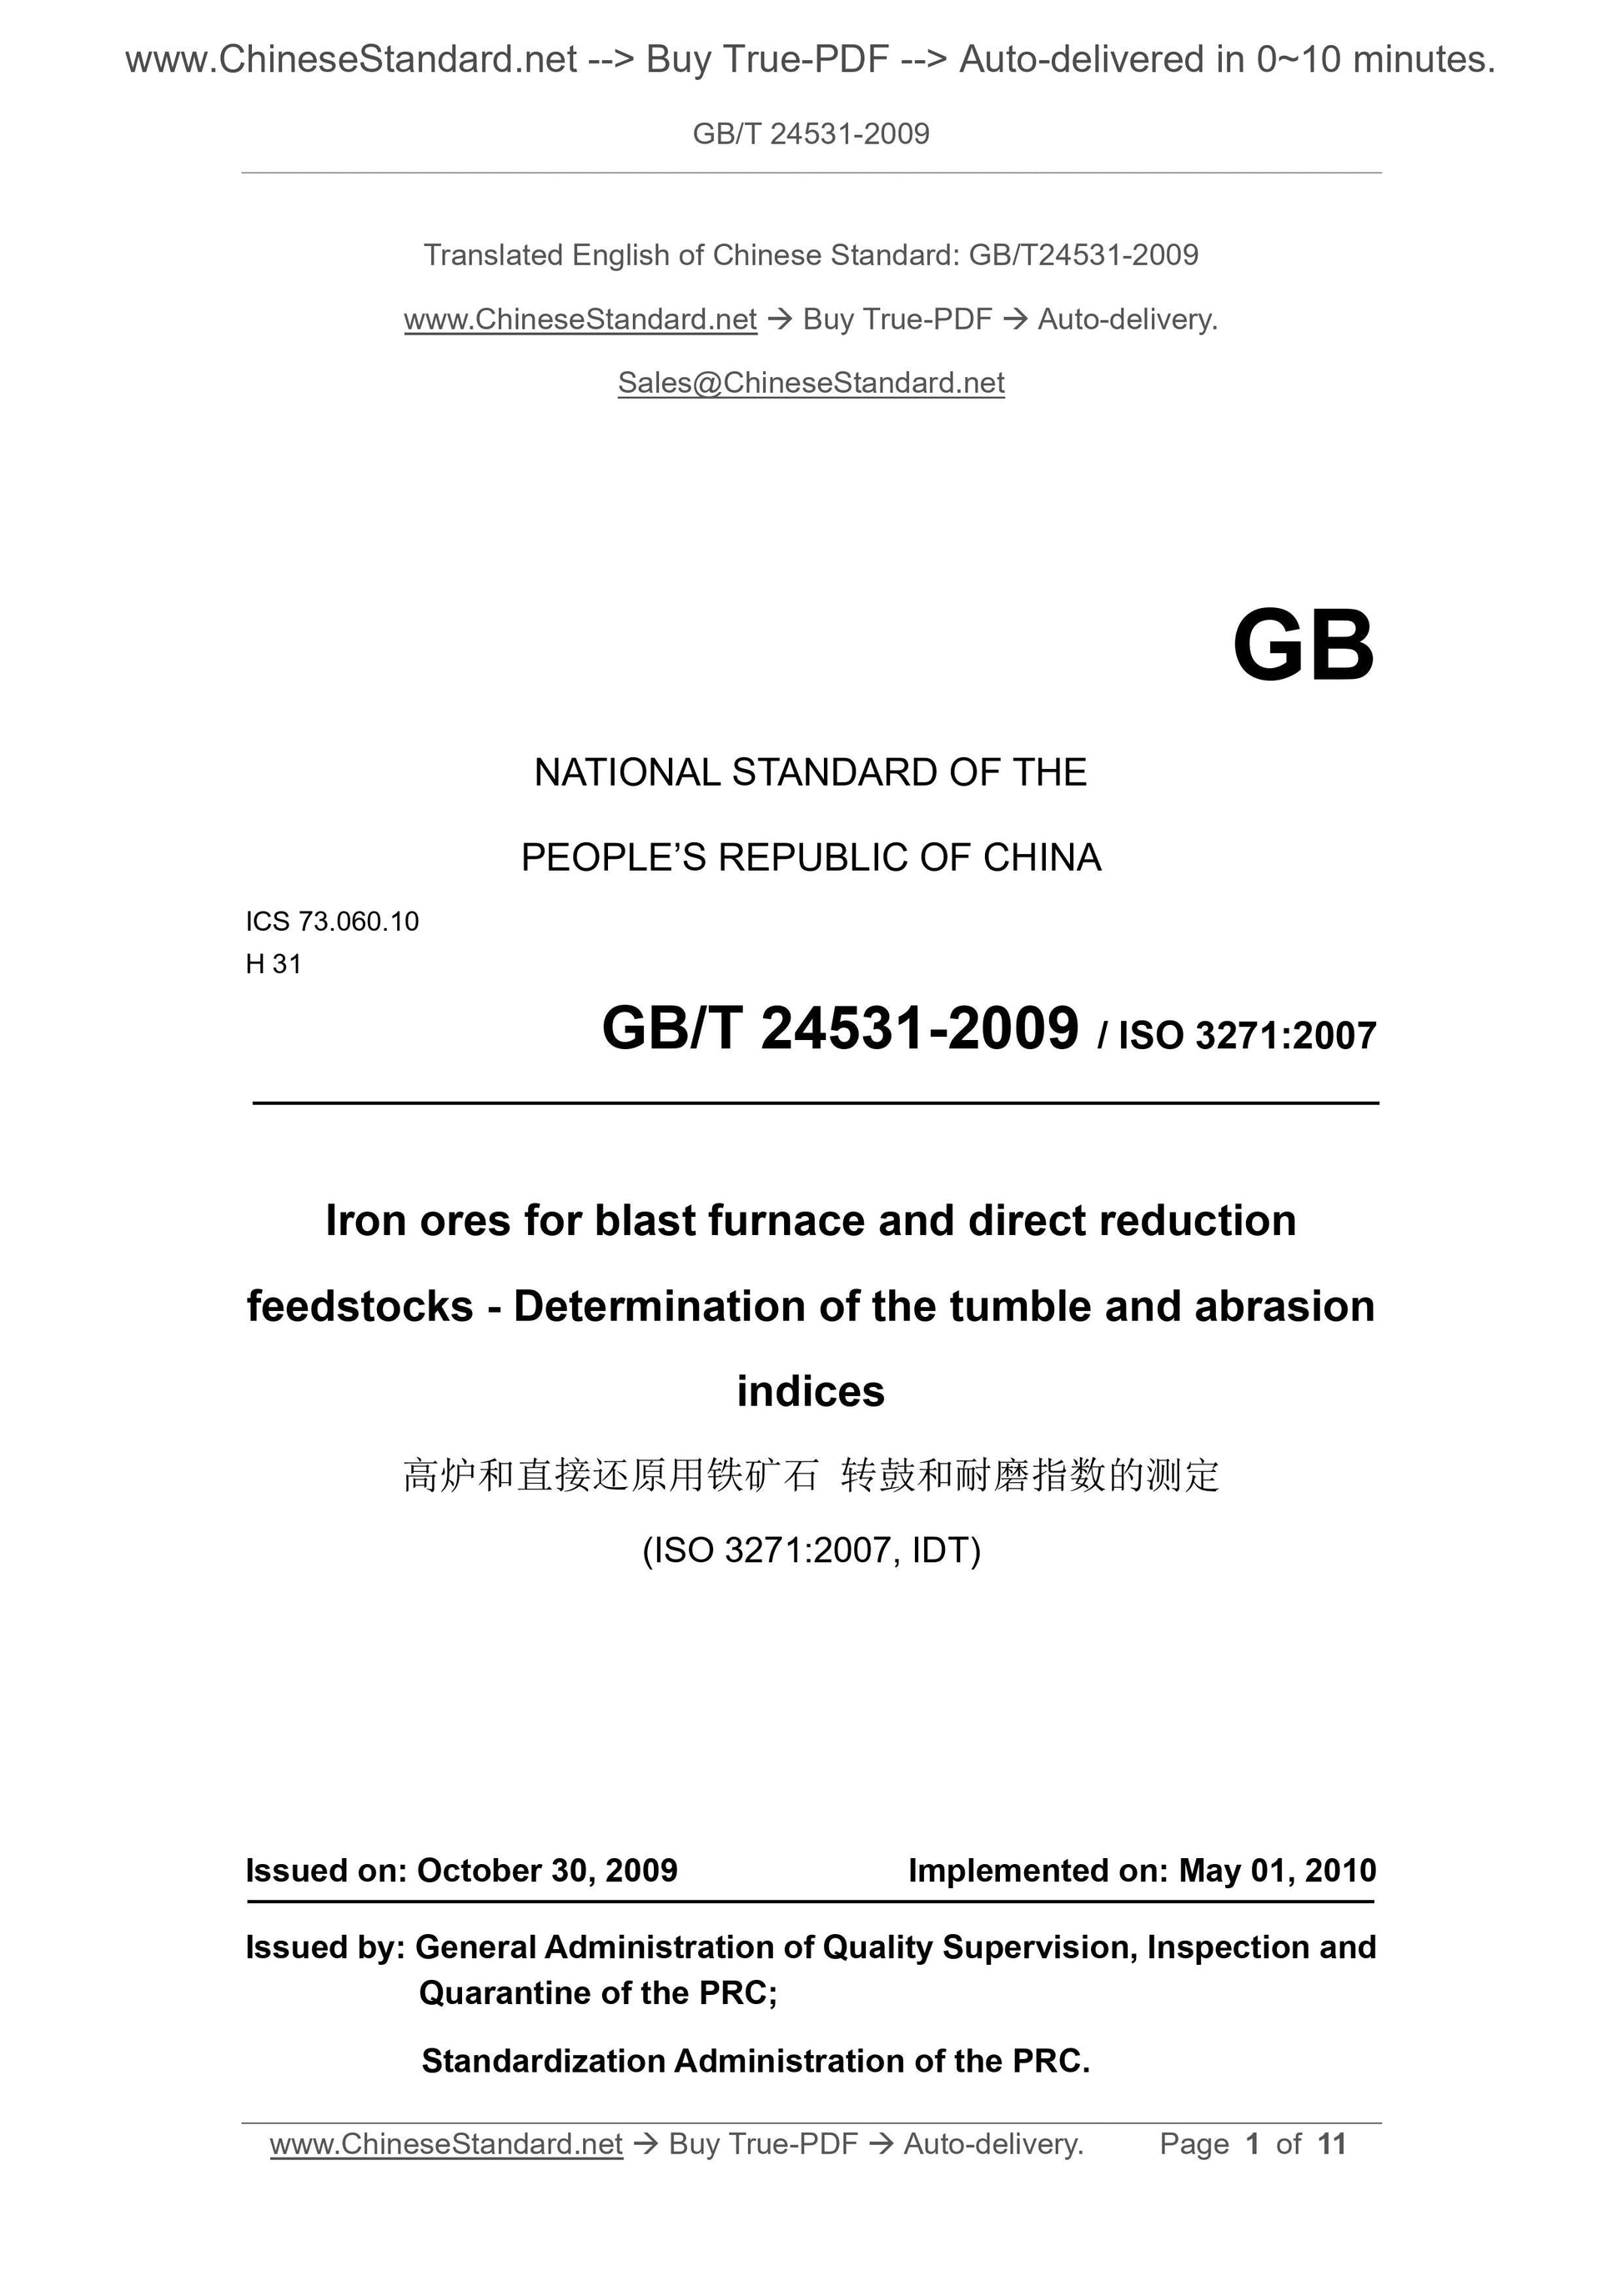 GB/T 24531-2009 Page 1